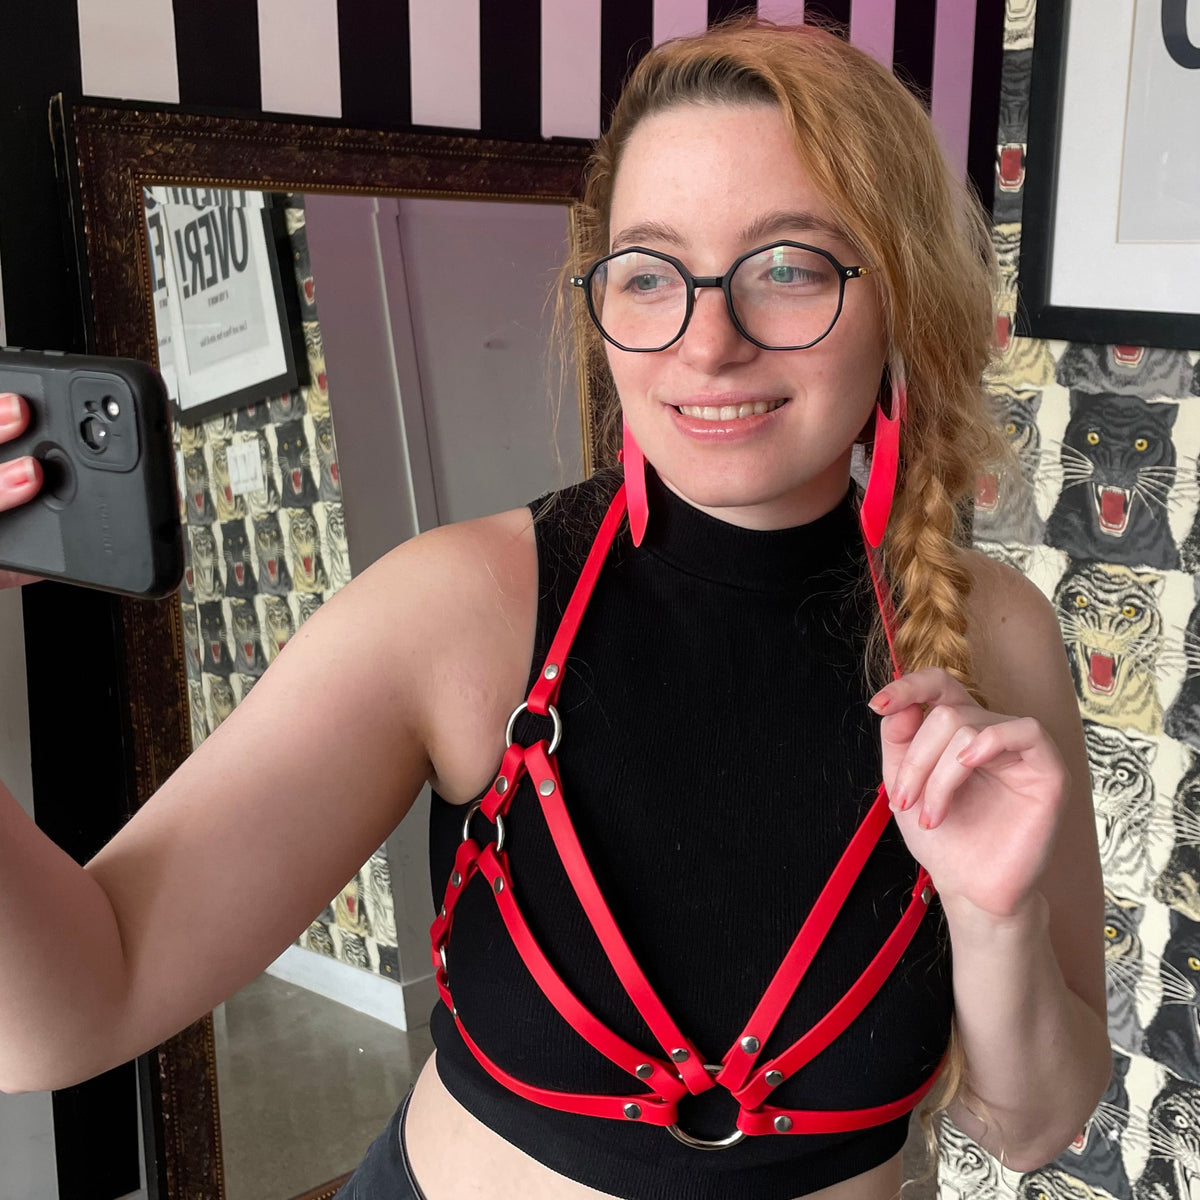 Woman wearing a red harness top outfit taking a selfie.